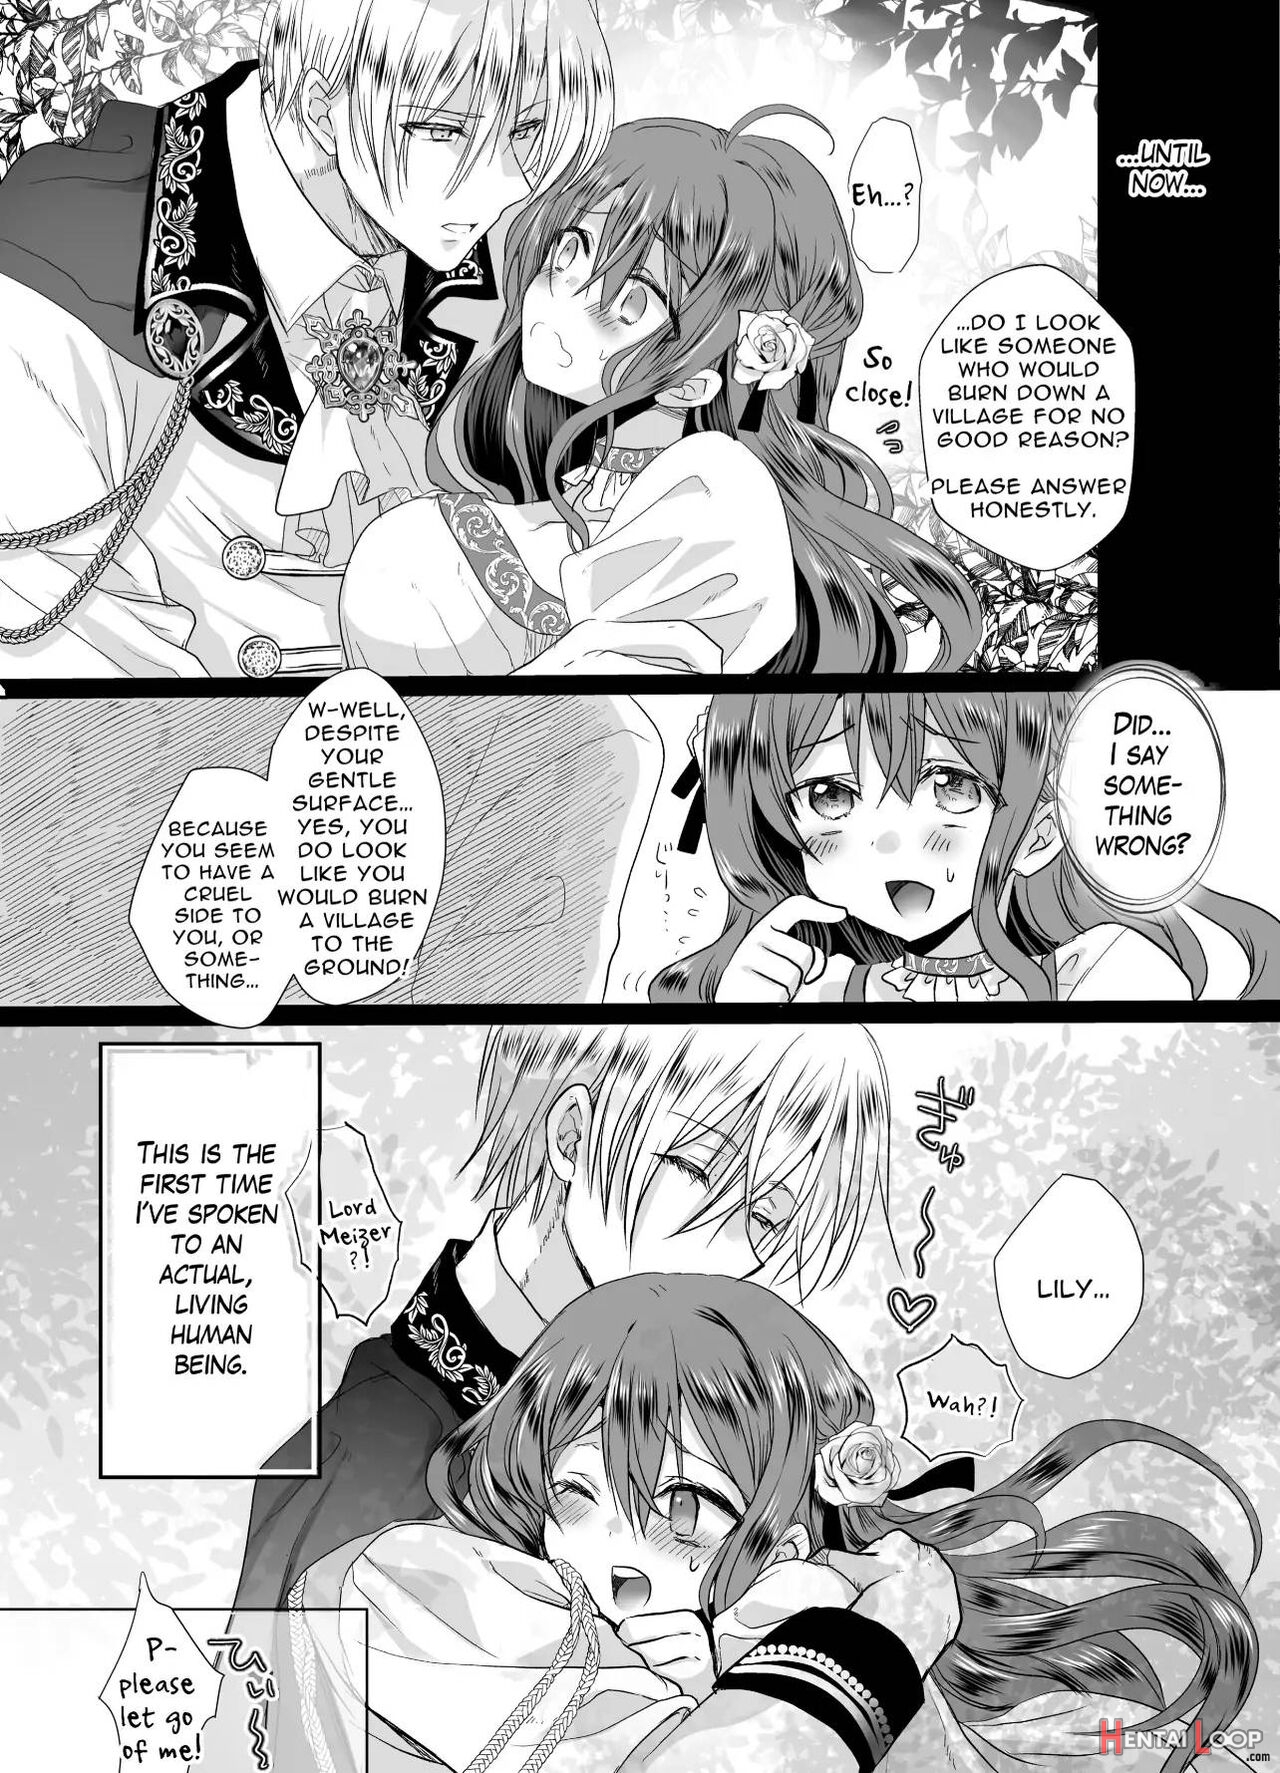  jk's Tragic Isekai Reincarnation As The Villainess ~but My Precious Side Character!~ page 23